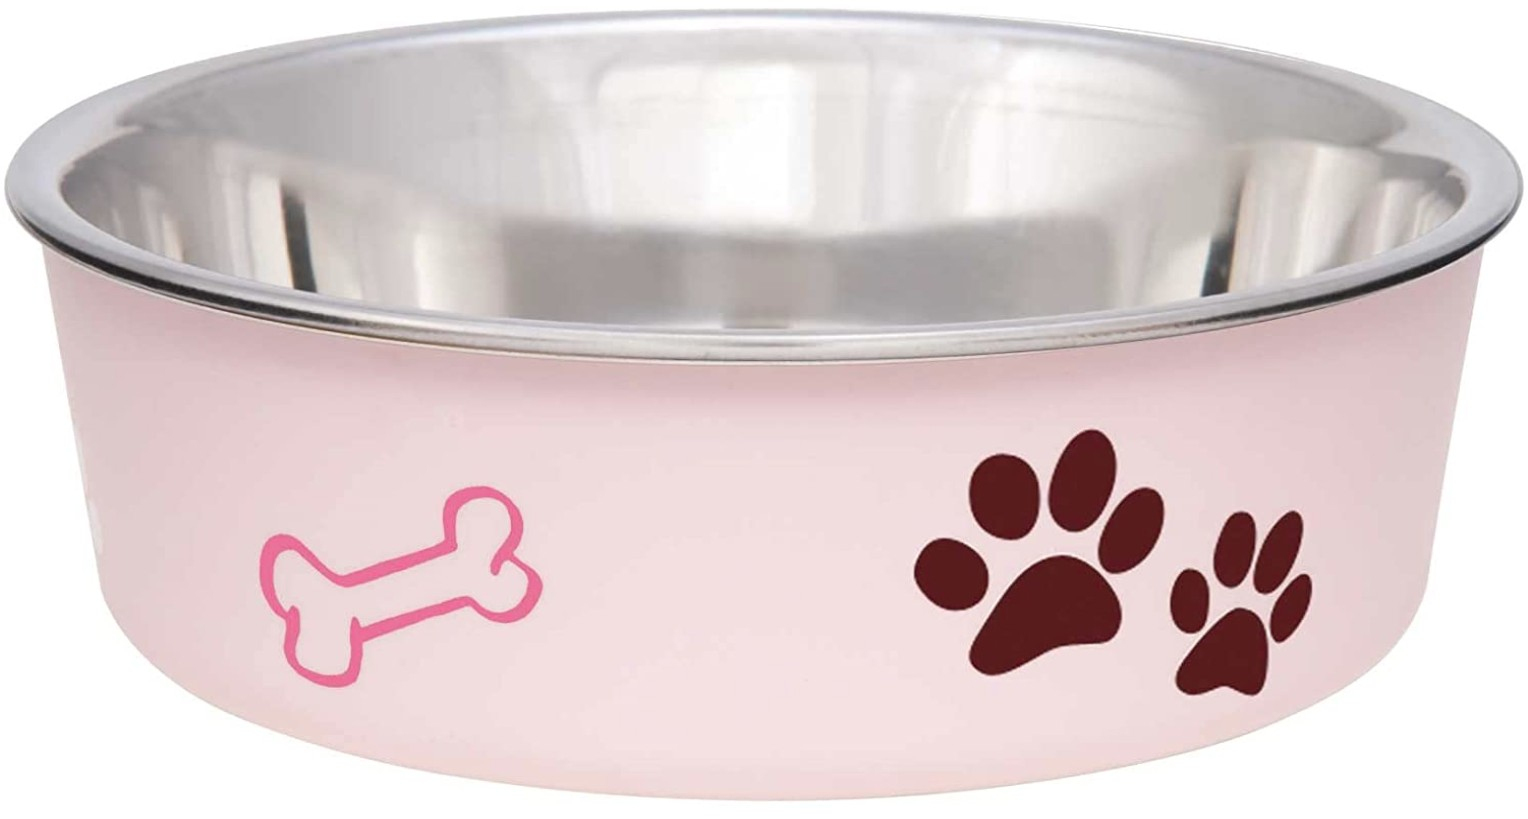 Primary image for Loving Pets Light Pink Stainless Steel Dish With Rubber Base Small - 1 count Lov